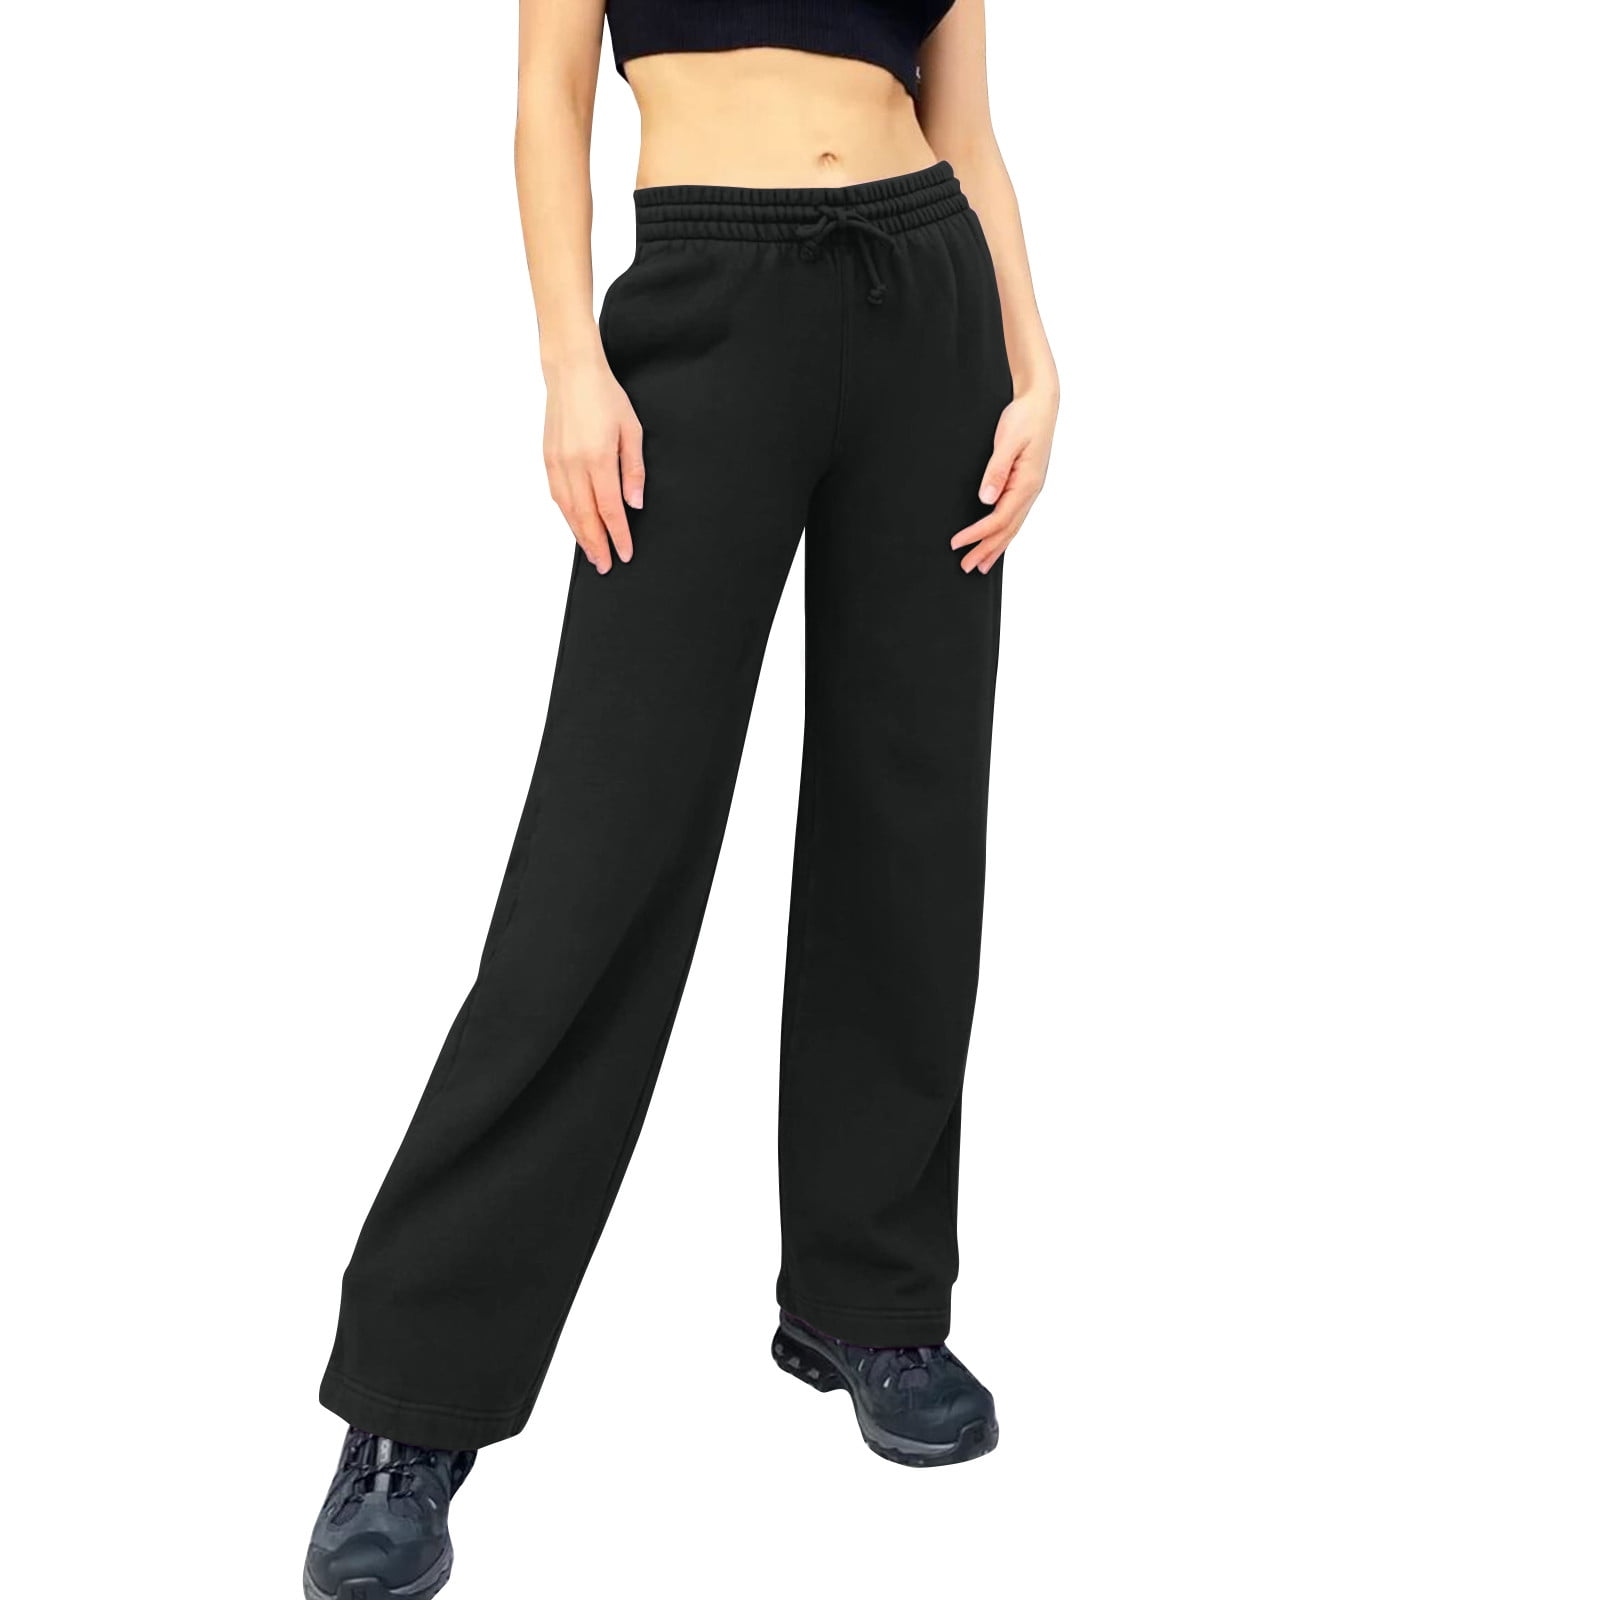 Susanny Straight Leg Sweatpants for Women Fleece Lined Drawstring Straight  Leg with Pockets Joggers Pants Baggy Athletic Petite High Waisted Gym